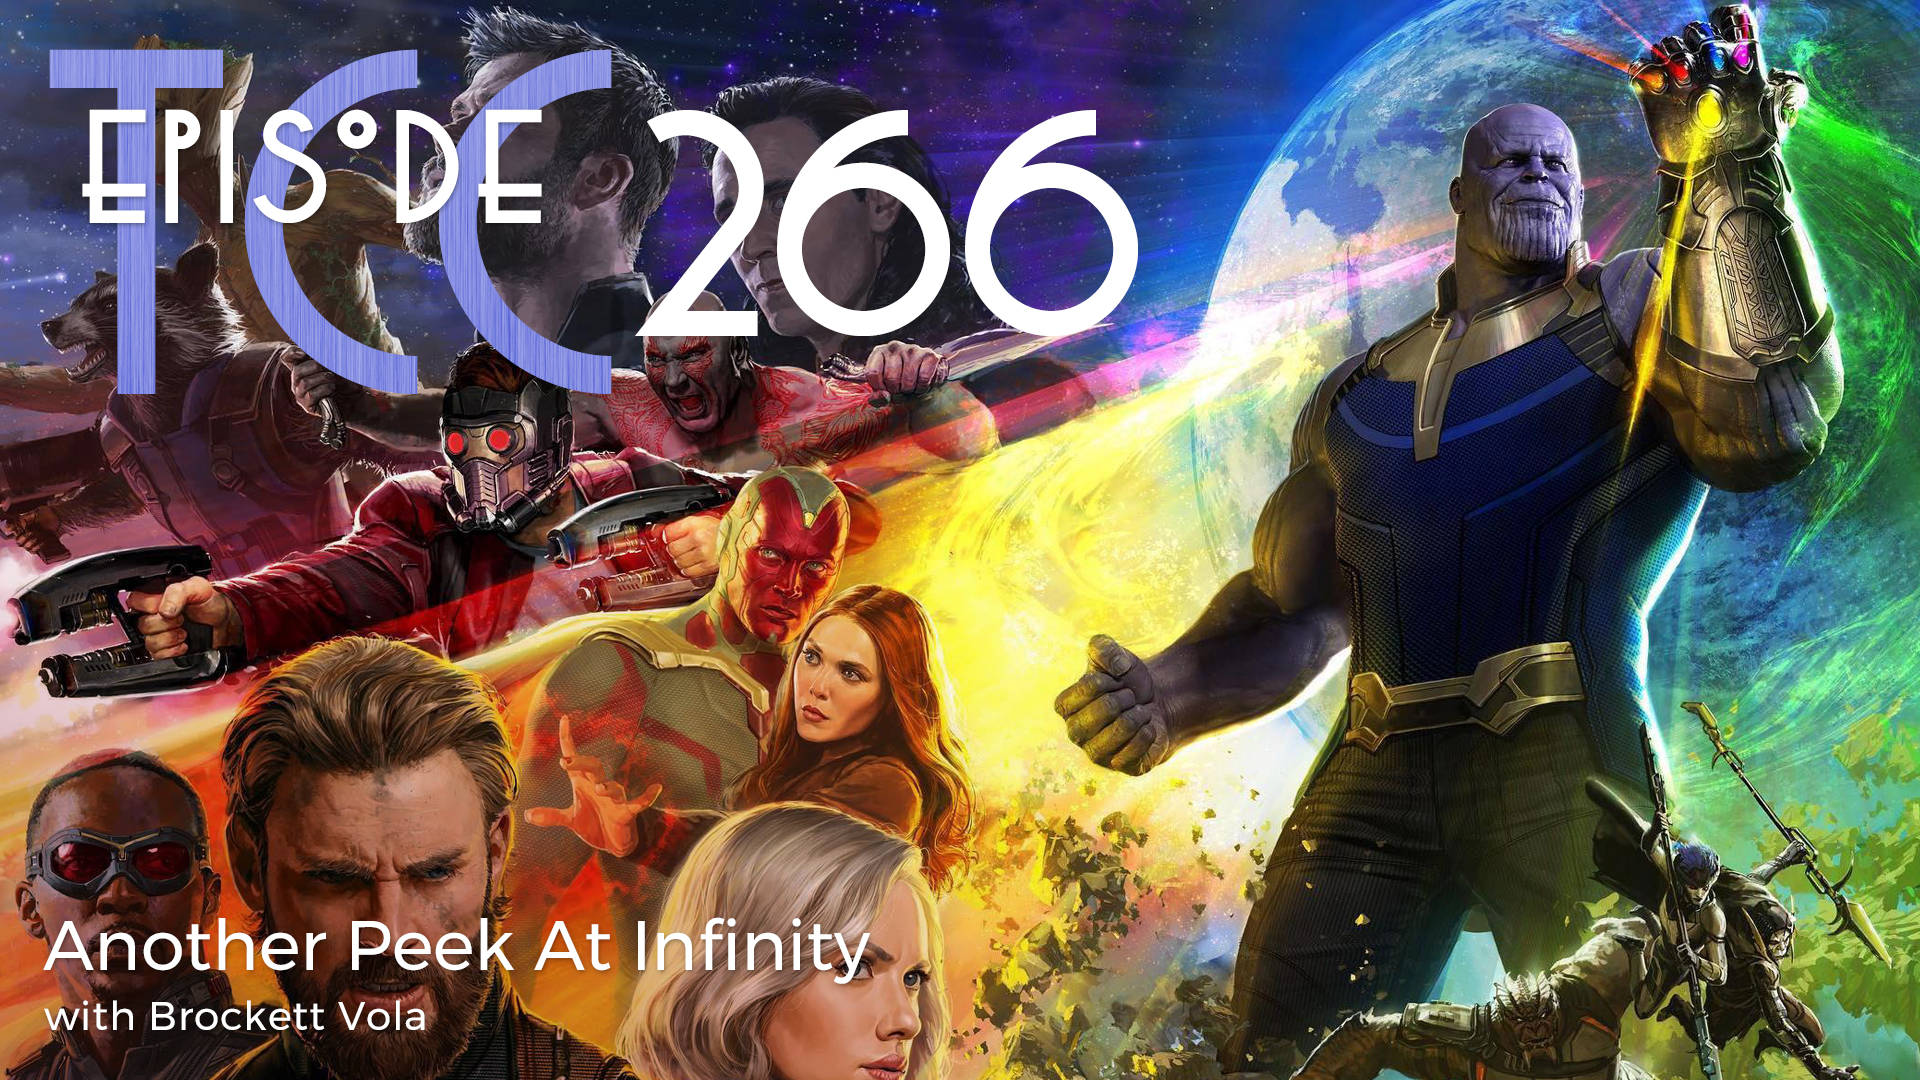 The Citadel Cafe 266: Another Peek At Infinity